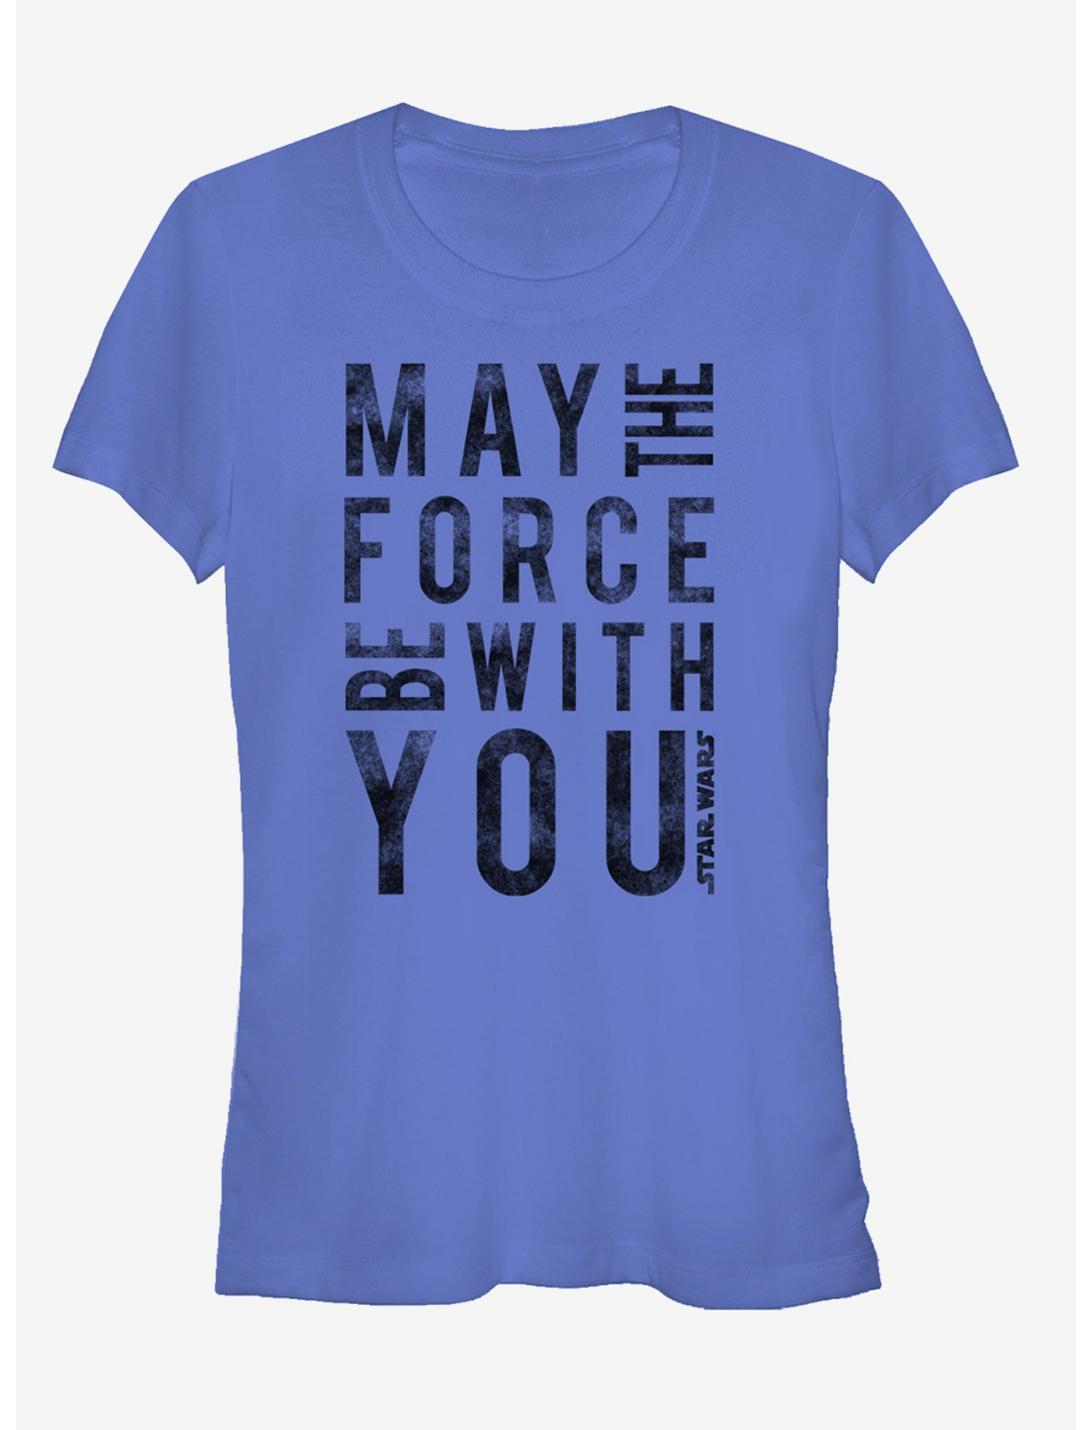 Star Wars Distressed May the Force Be With You Girls T-Shirt, ROYAL, hi-res